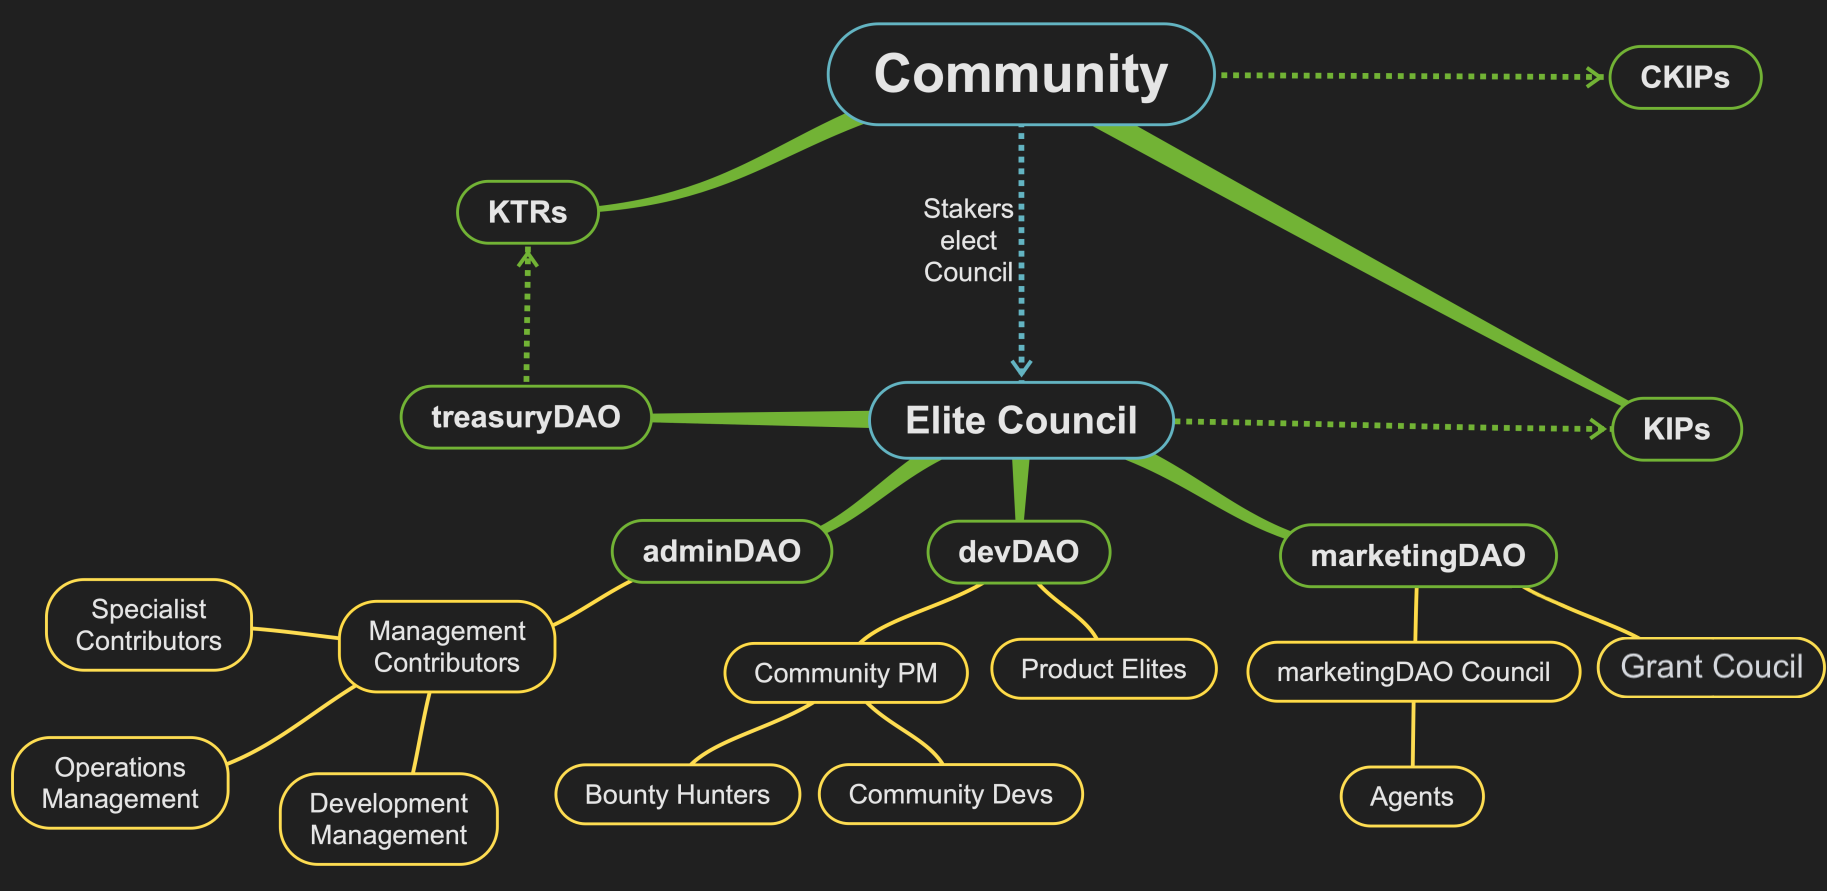 Infographic was modified by adding the Grant Council. Source: https://docs.kwenta.io/dao/governance-framework 